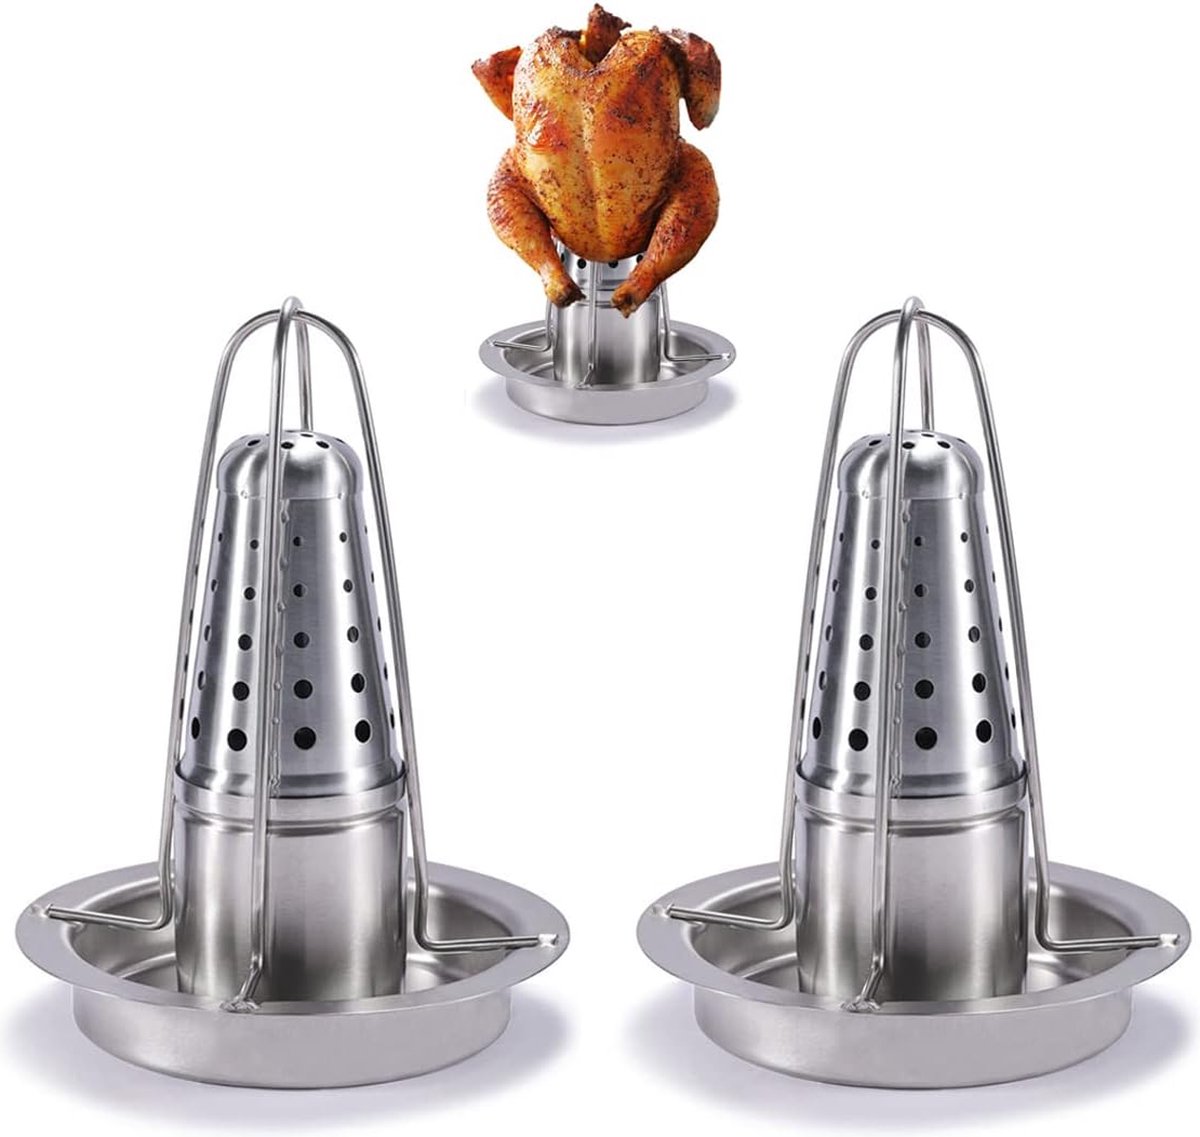 Chicken Roaster - The Stainless Steel Chicken Holder - Beer Can Chicken Grill - Poultry Roasting Tray with Aroma Container (Pack of 2) (2)